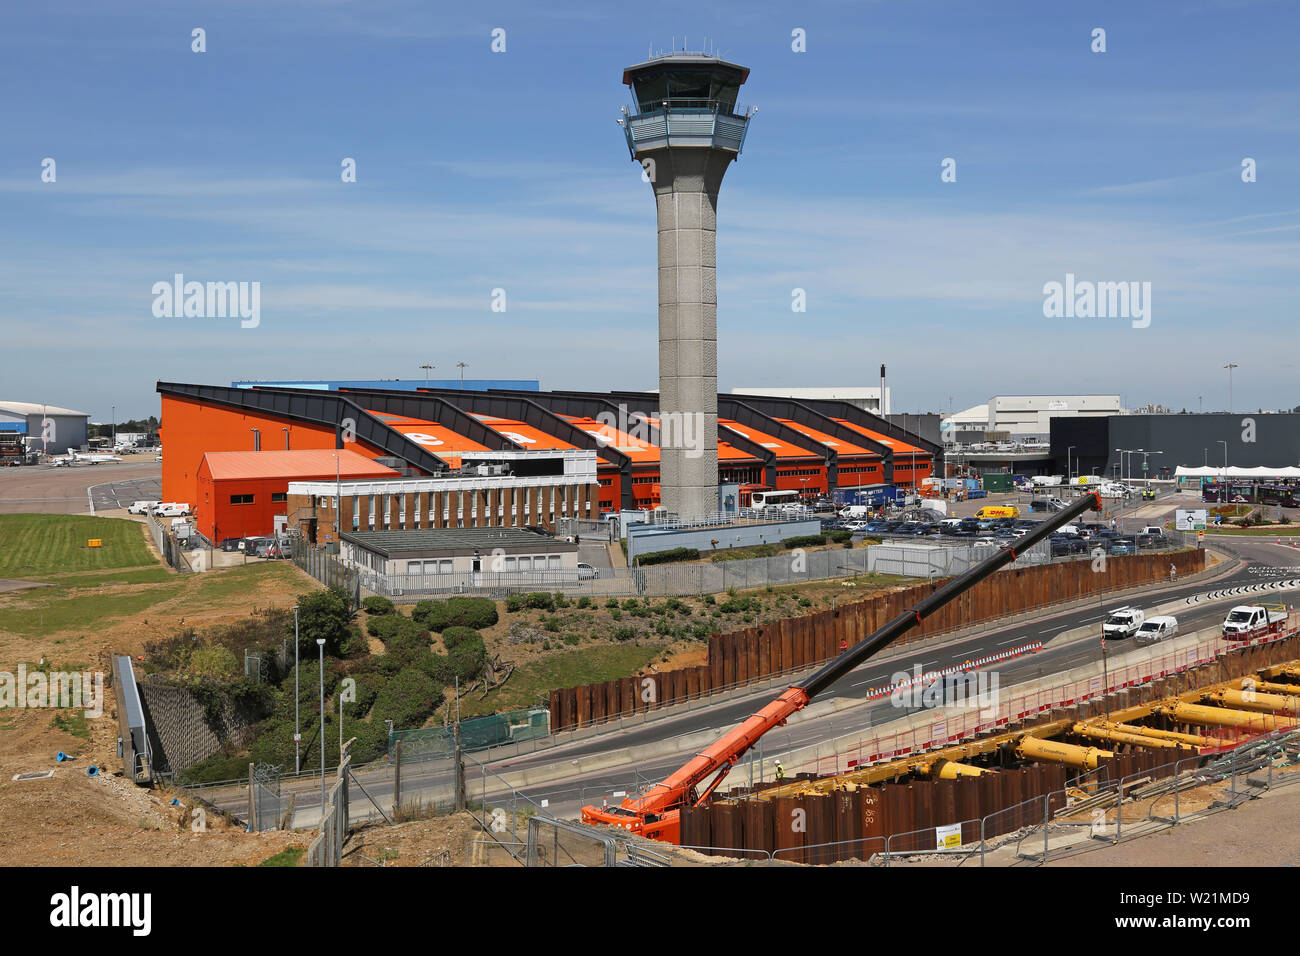 London Luton Airport, central area showing Easyjet Head Office, control tower and excavation for the new DART rail link - due to open in 2021. Stock Photo